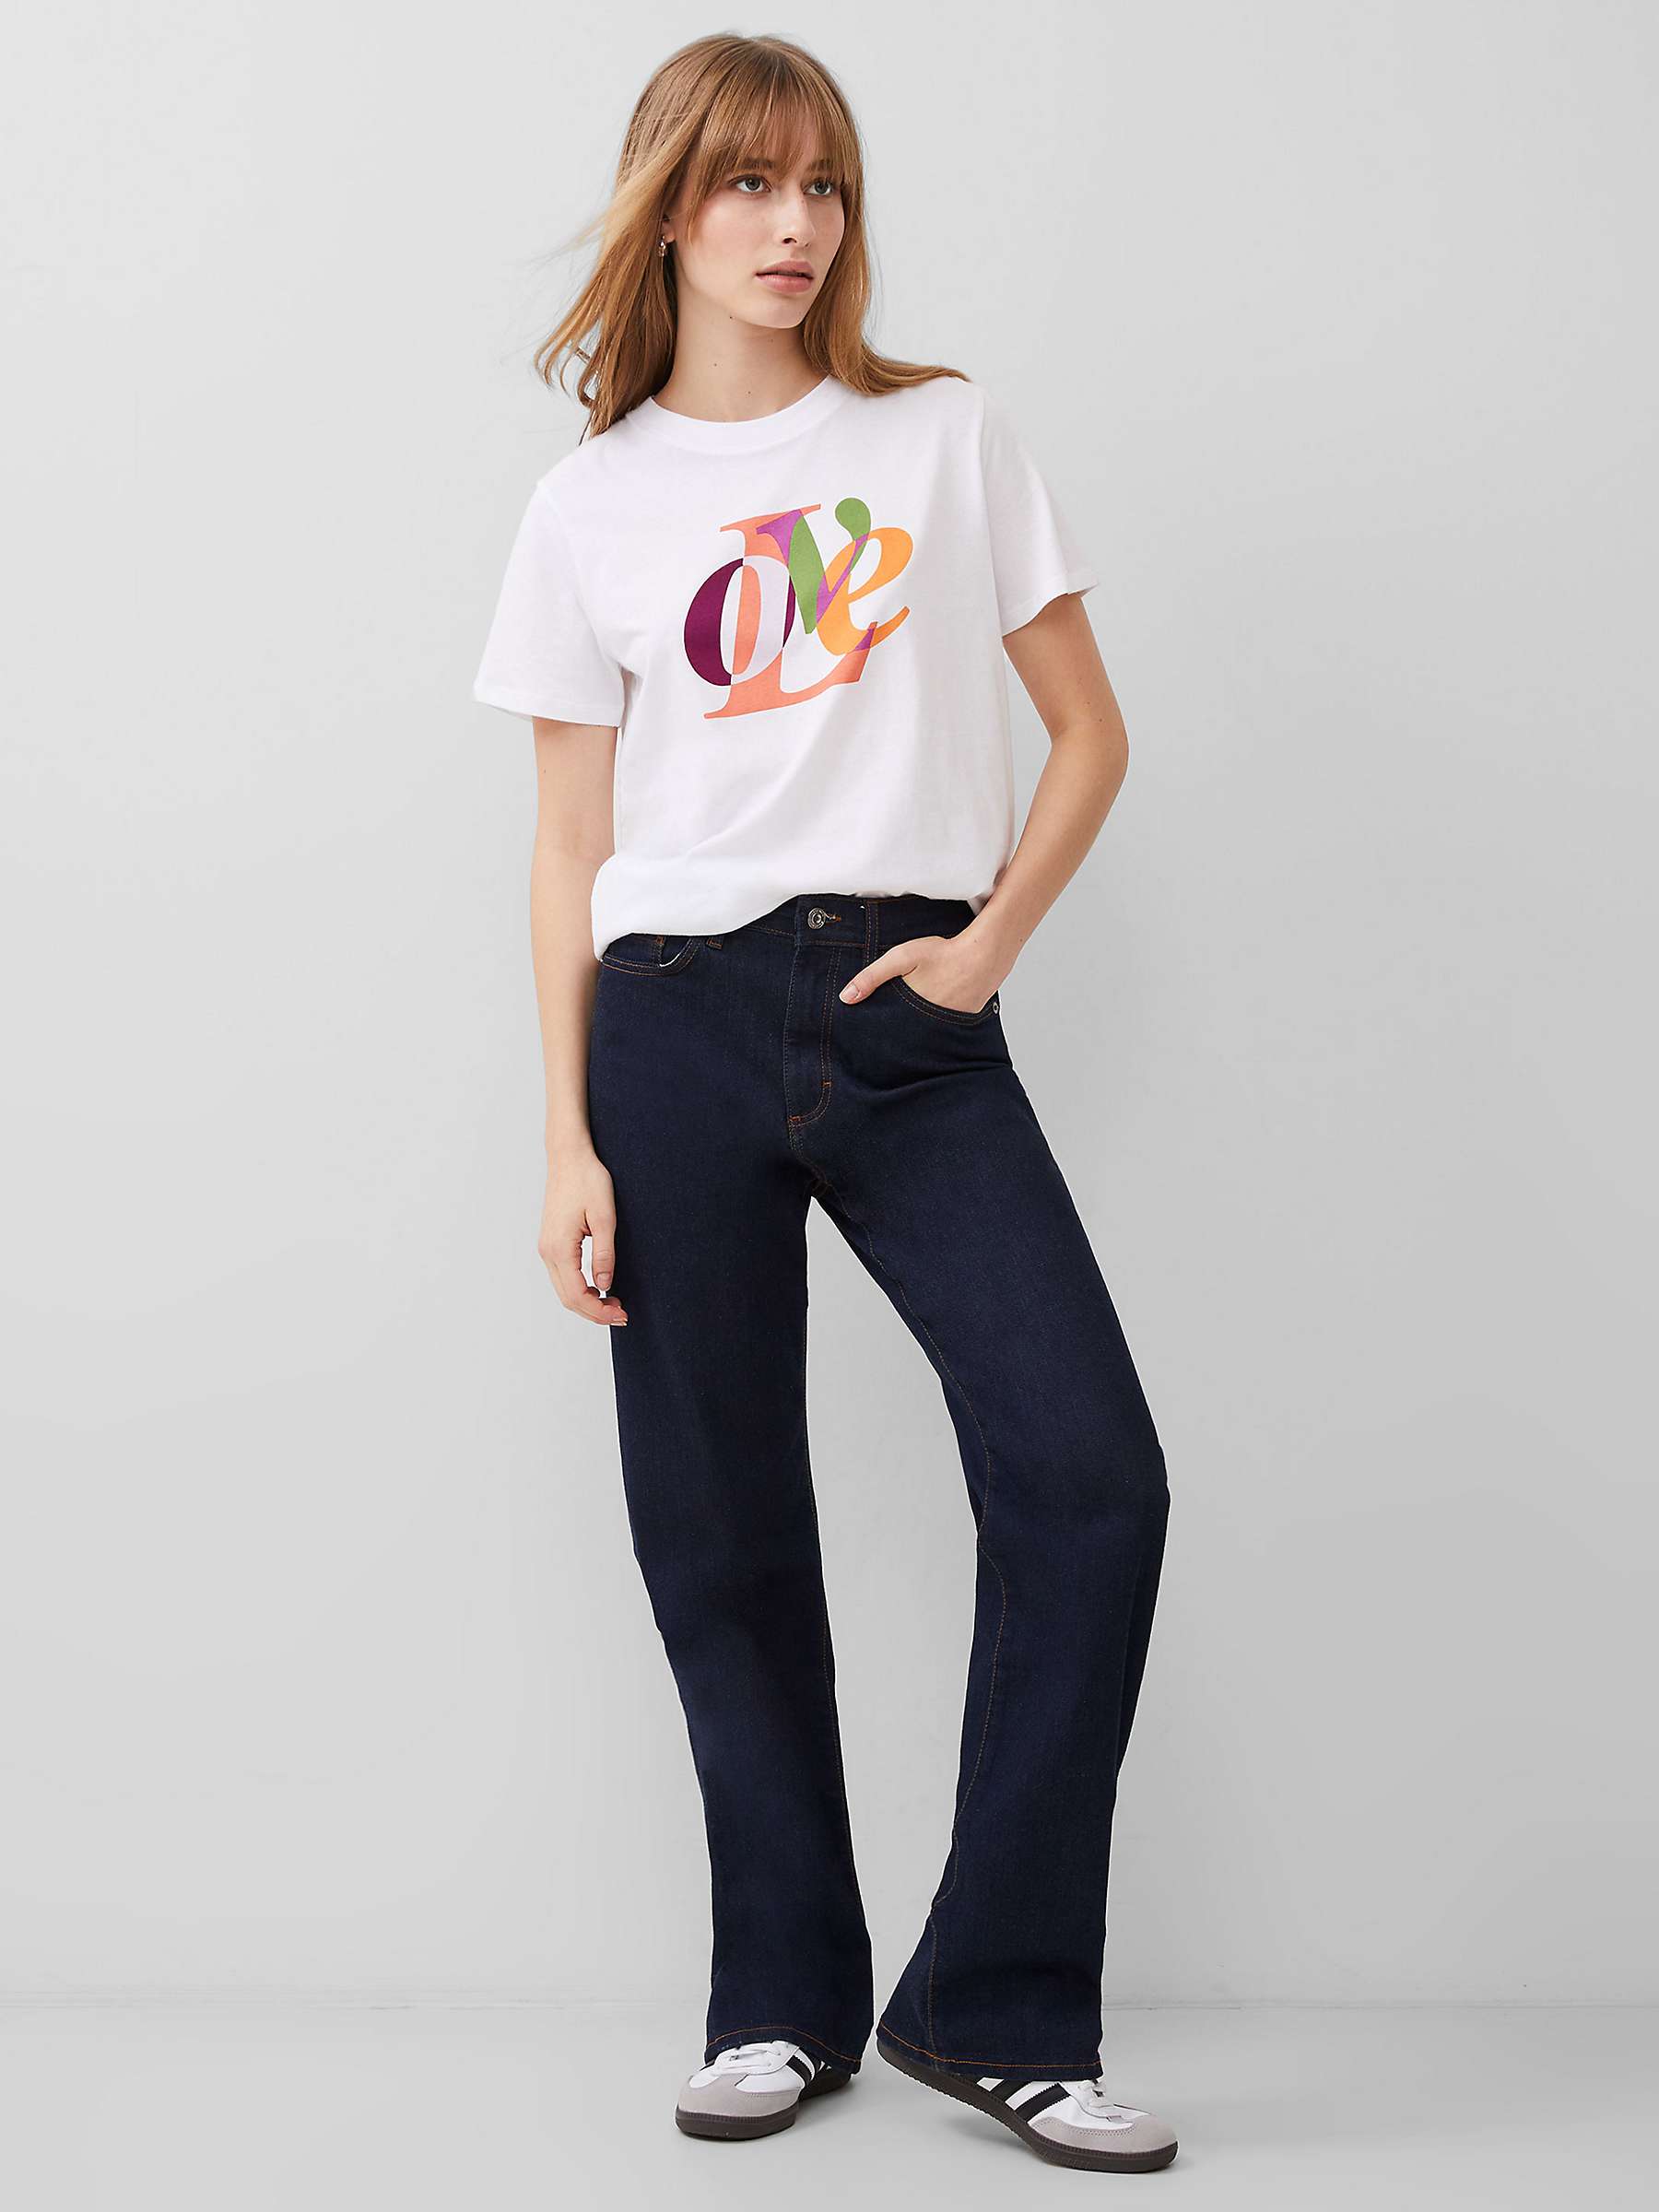 Buy French Connection Love Graphic T-Shirt, Linen White Online at johnlewis.com